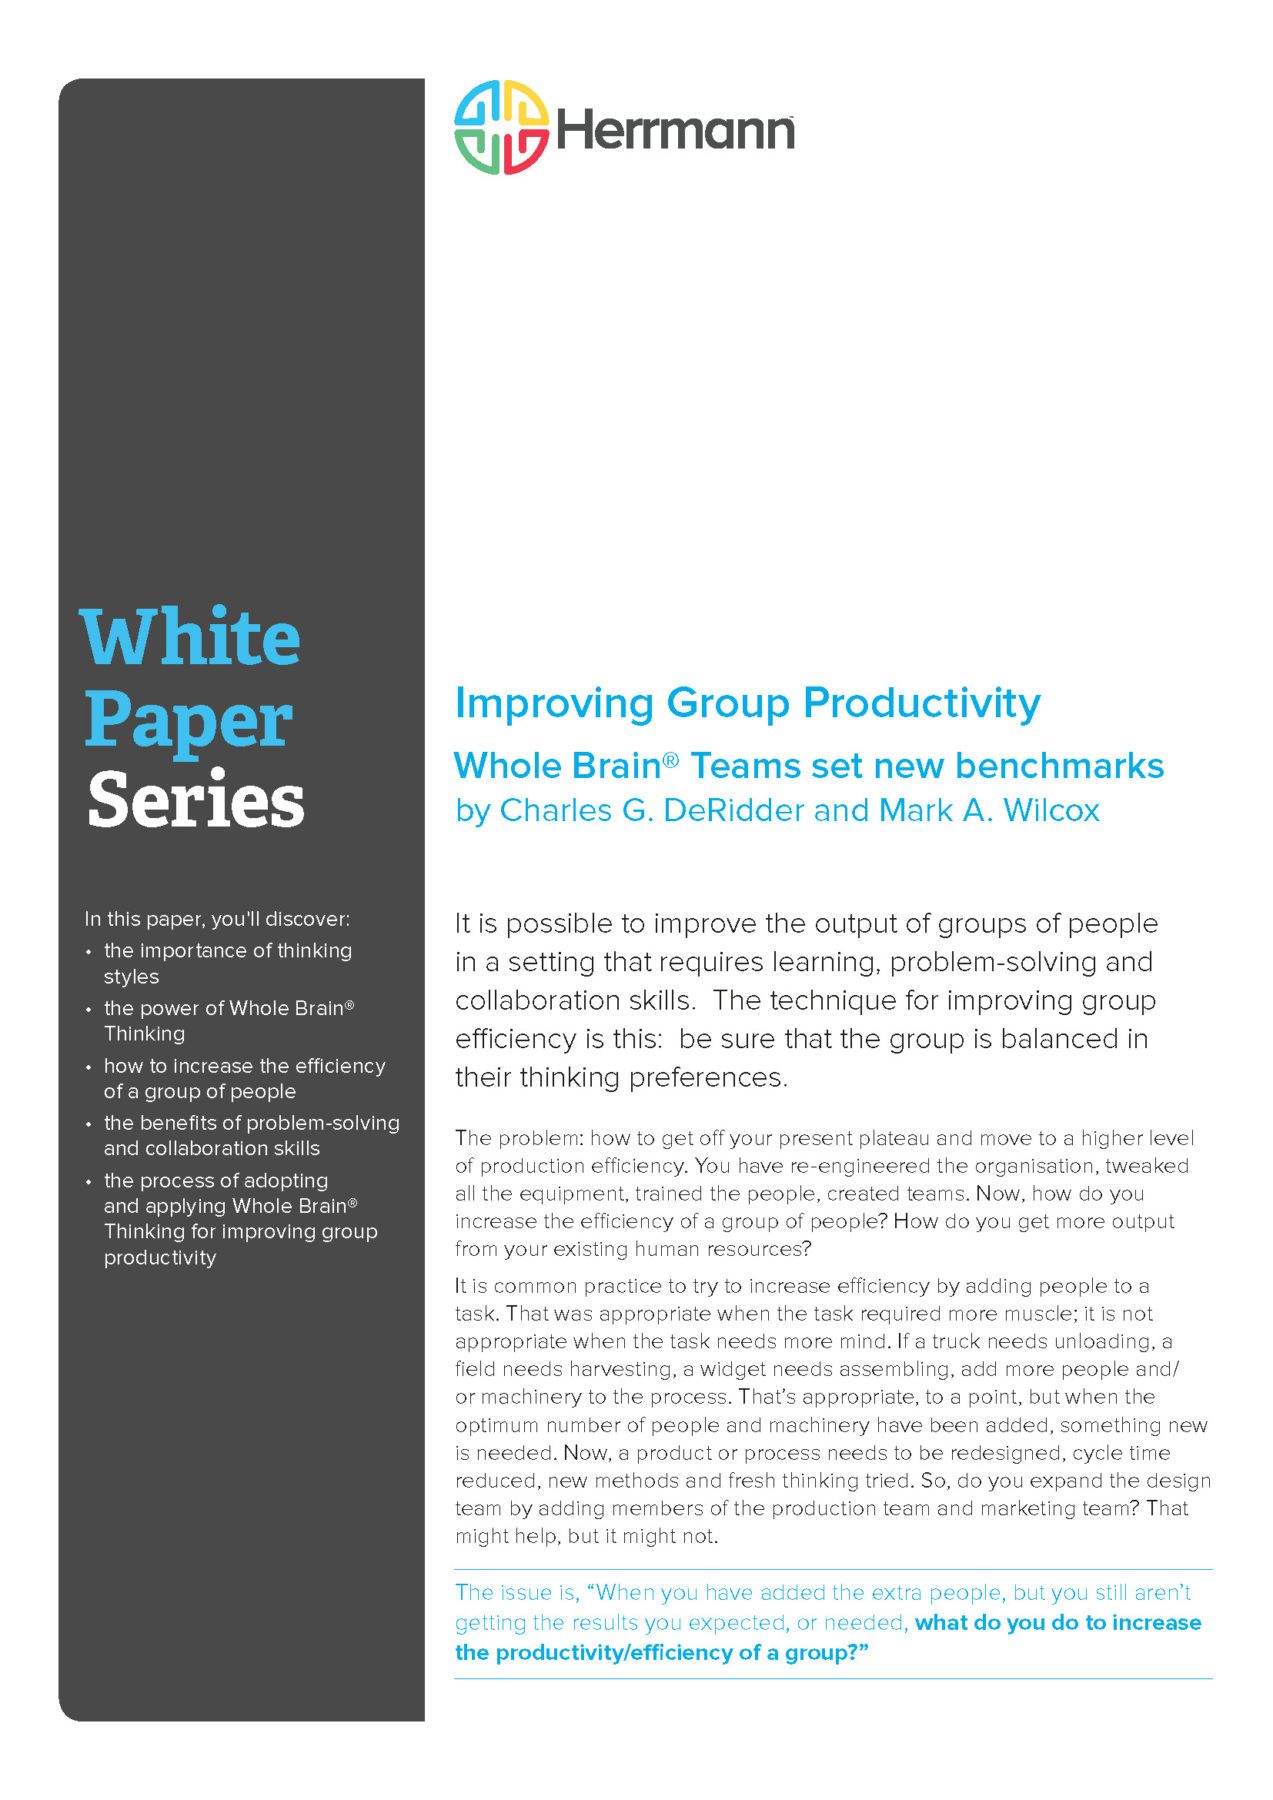 White Paper - Improving Group Productivity